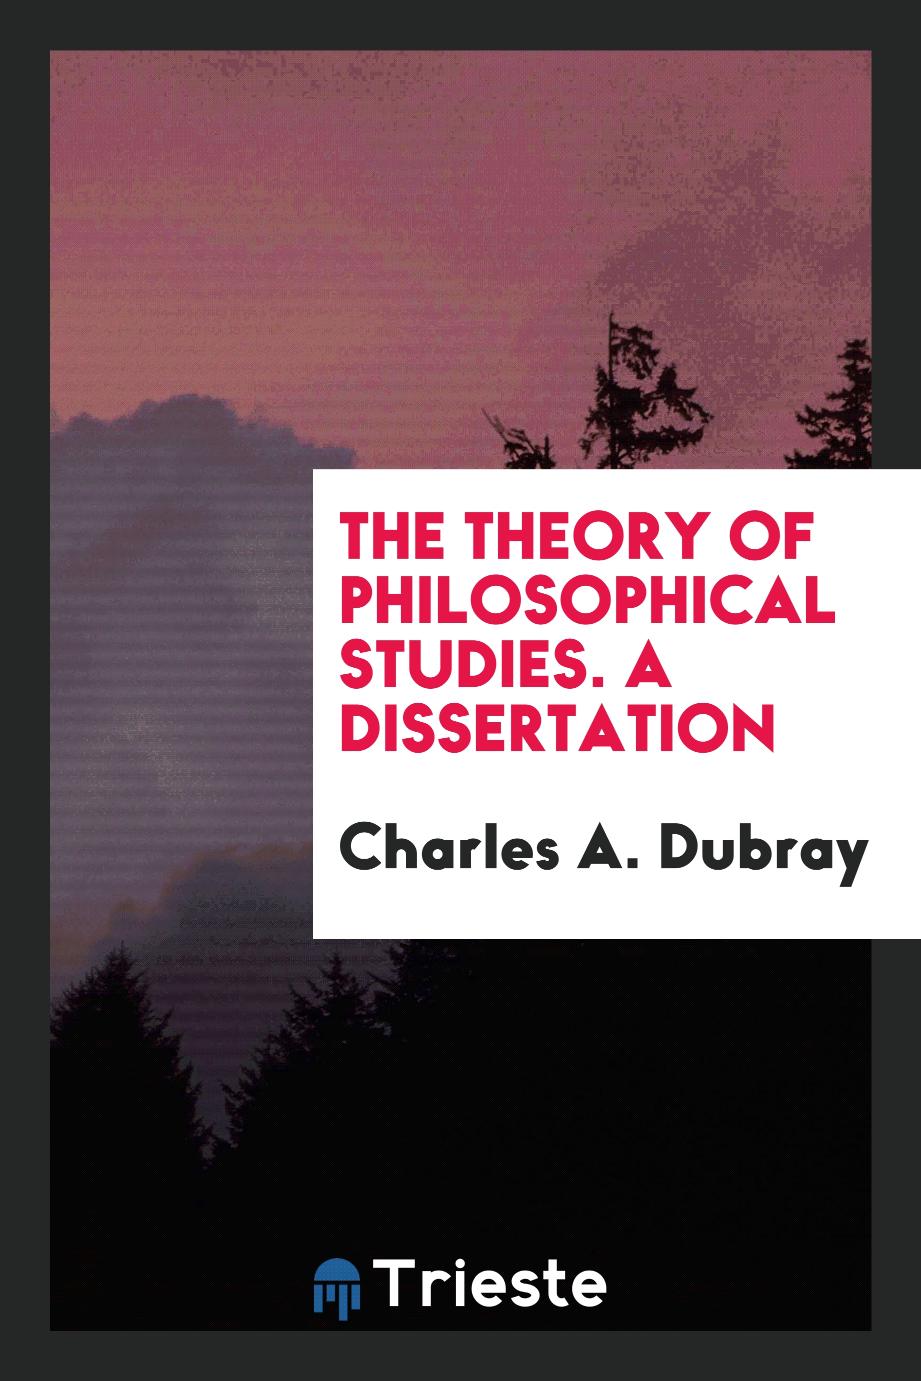 The Theory of Philosophical Studies. A Dissertation